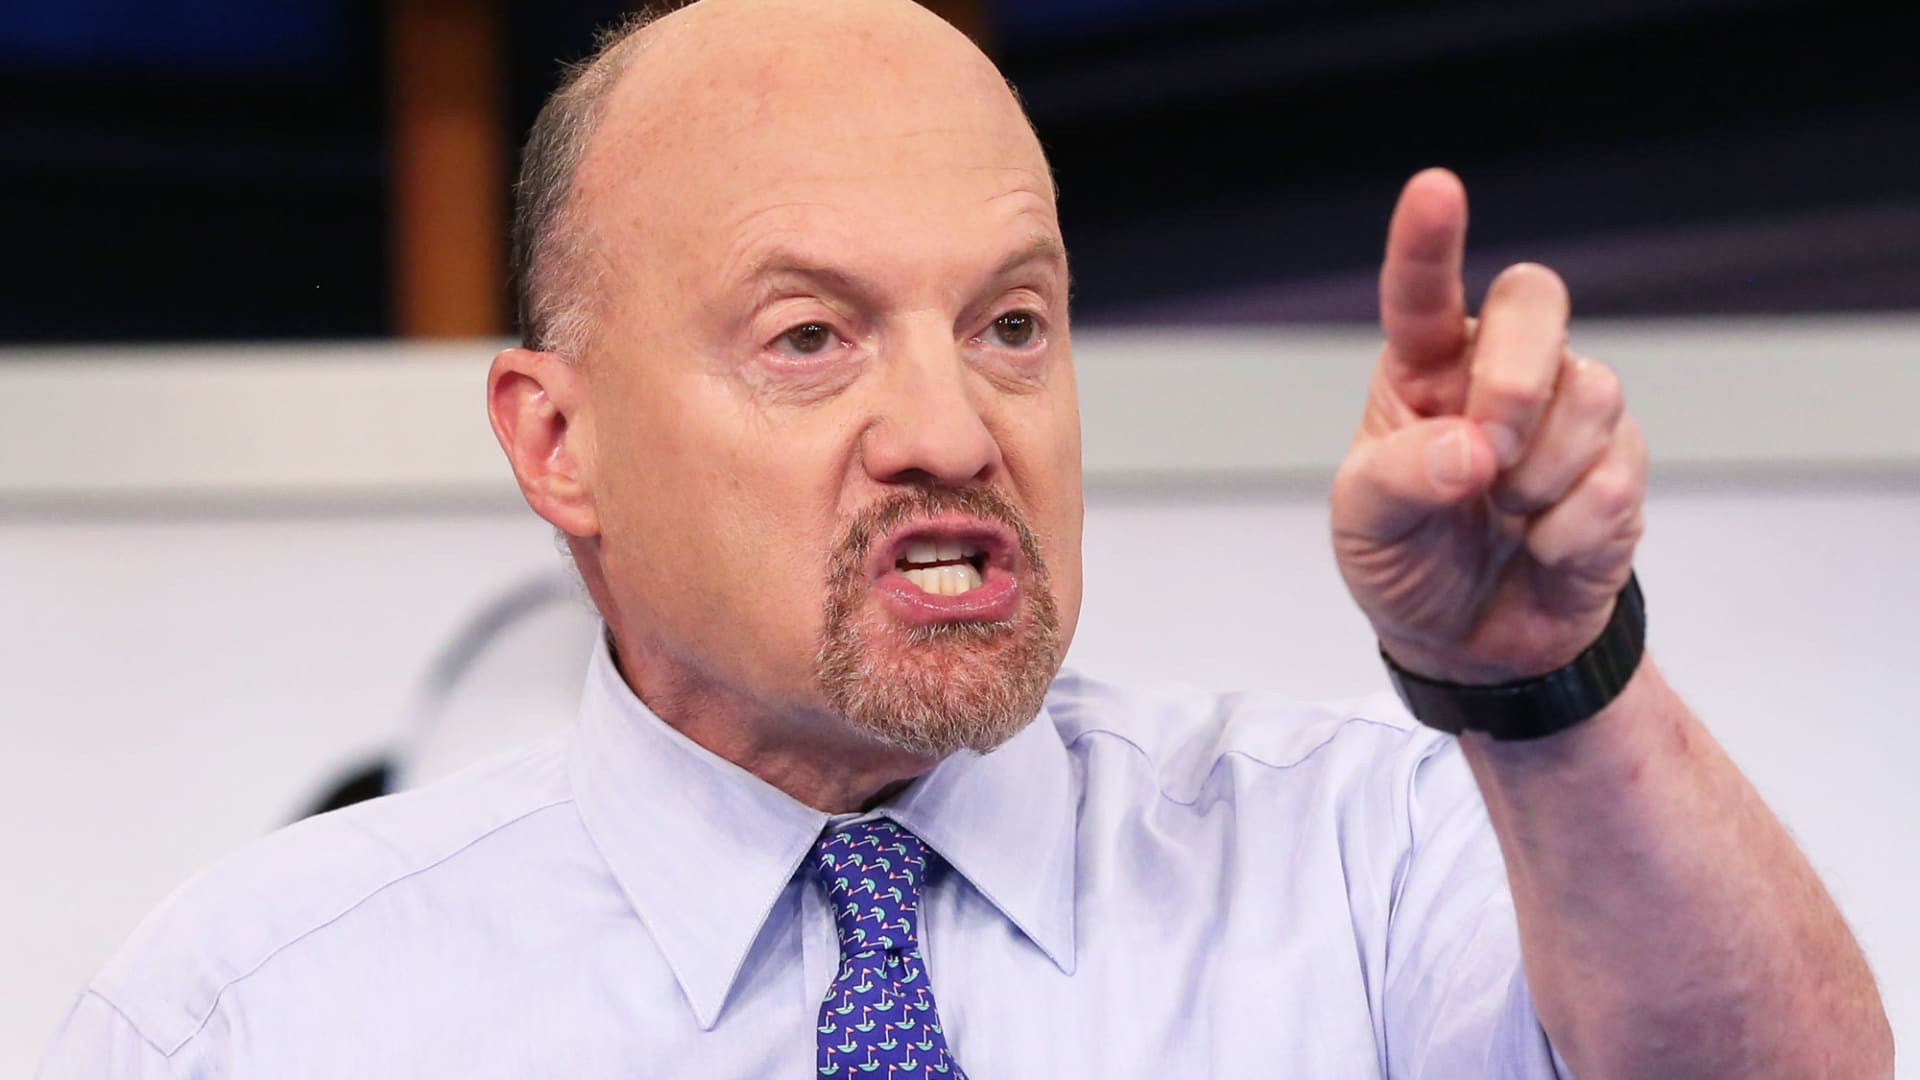 There will be more pain for investors who own purchases now, pay later playbacks, says Jim Cramer